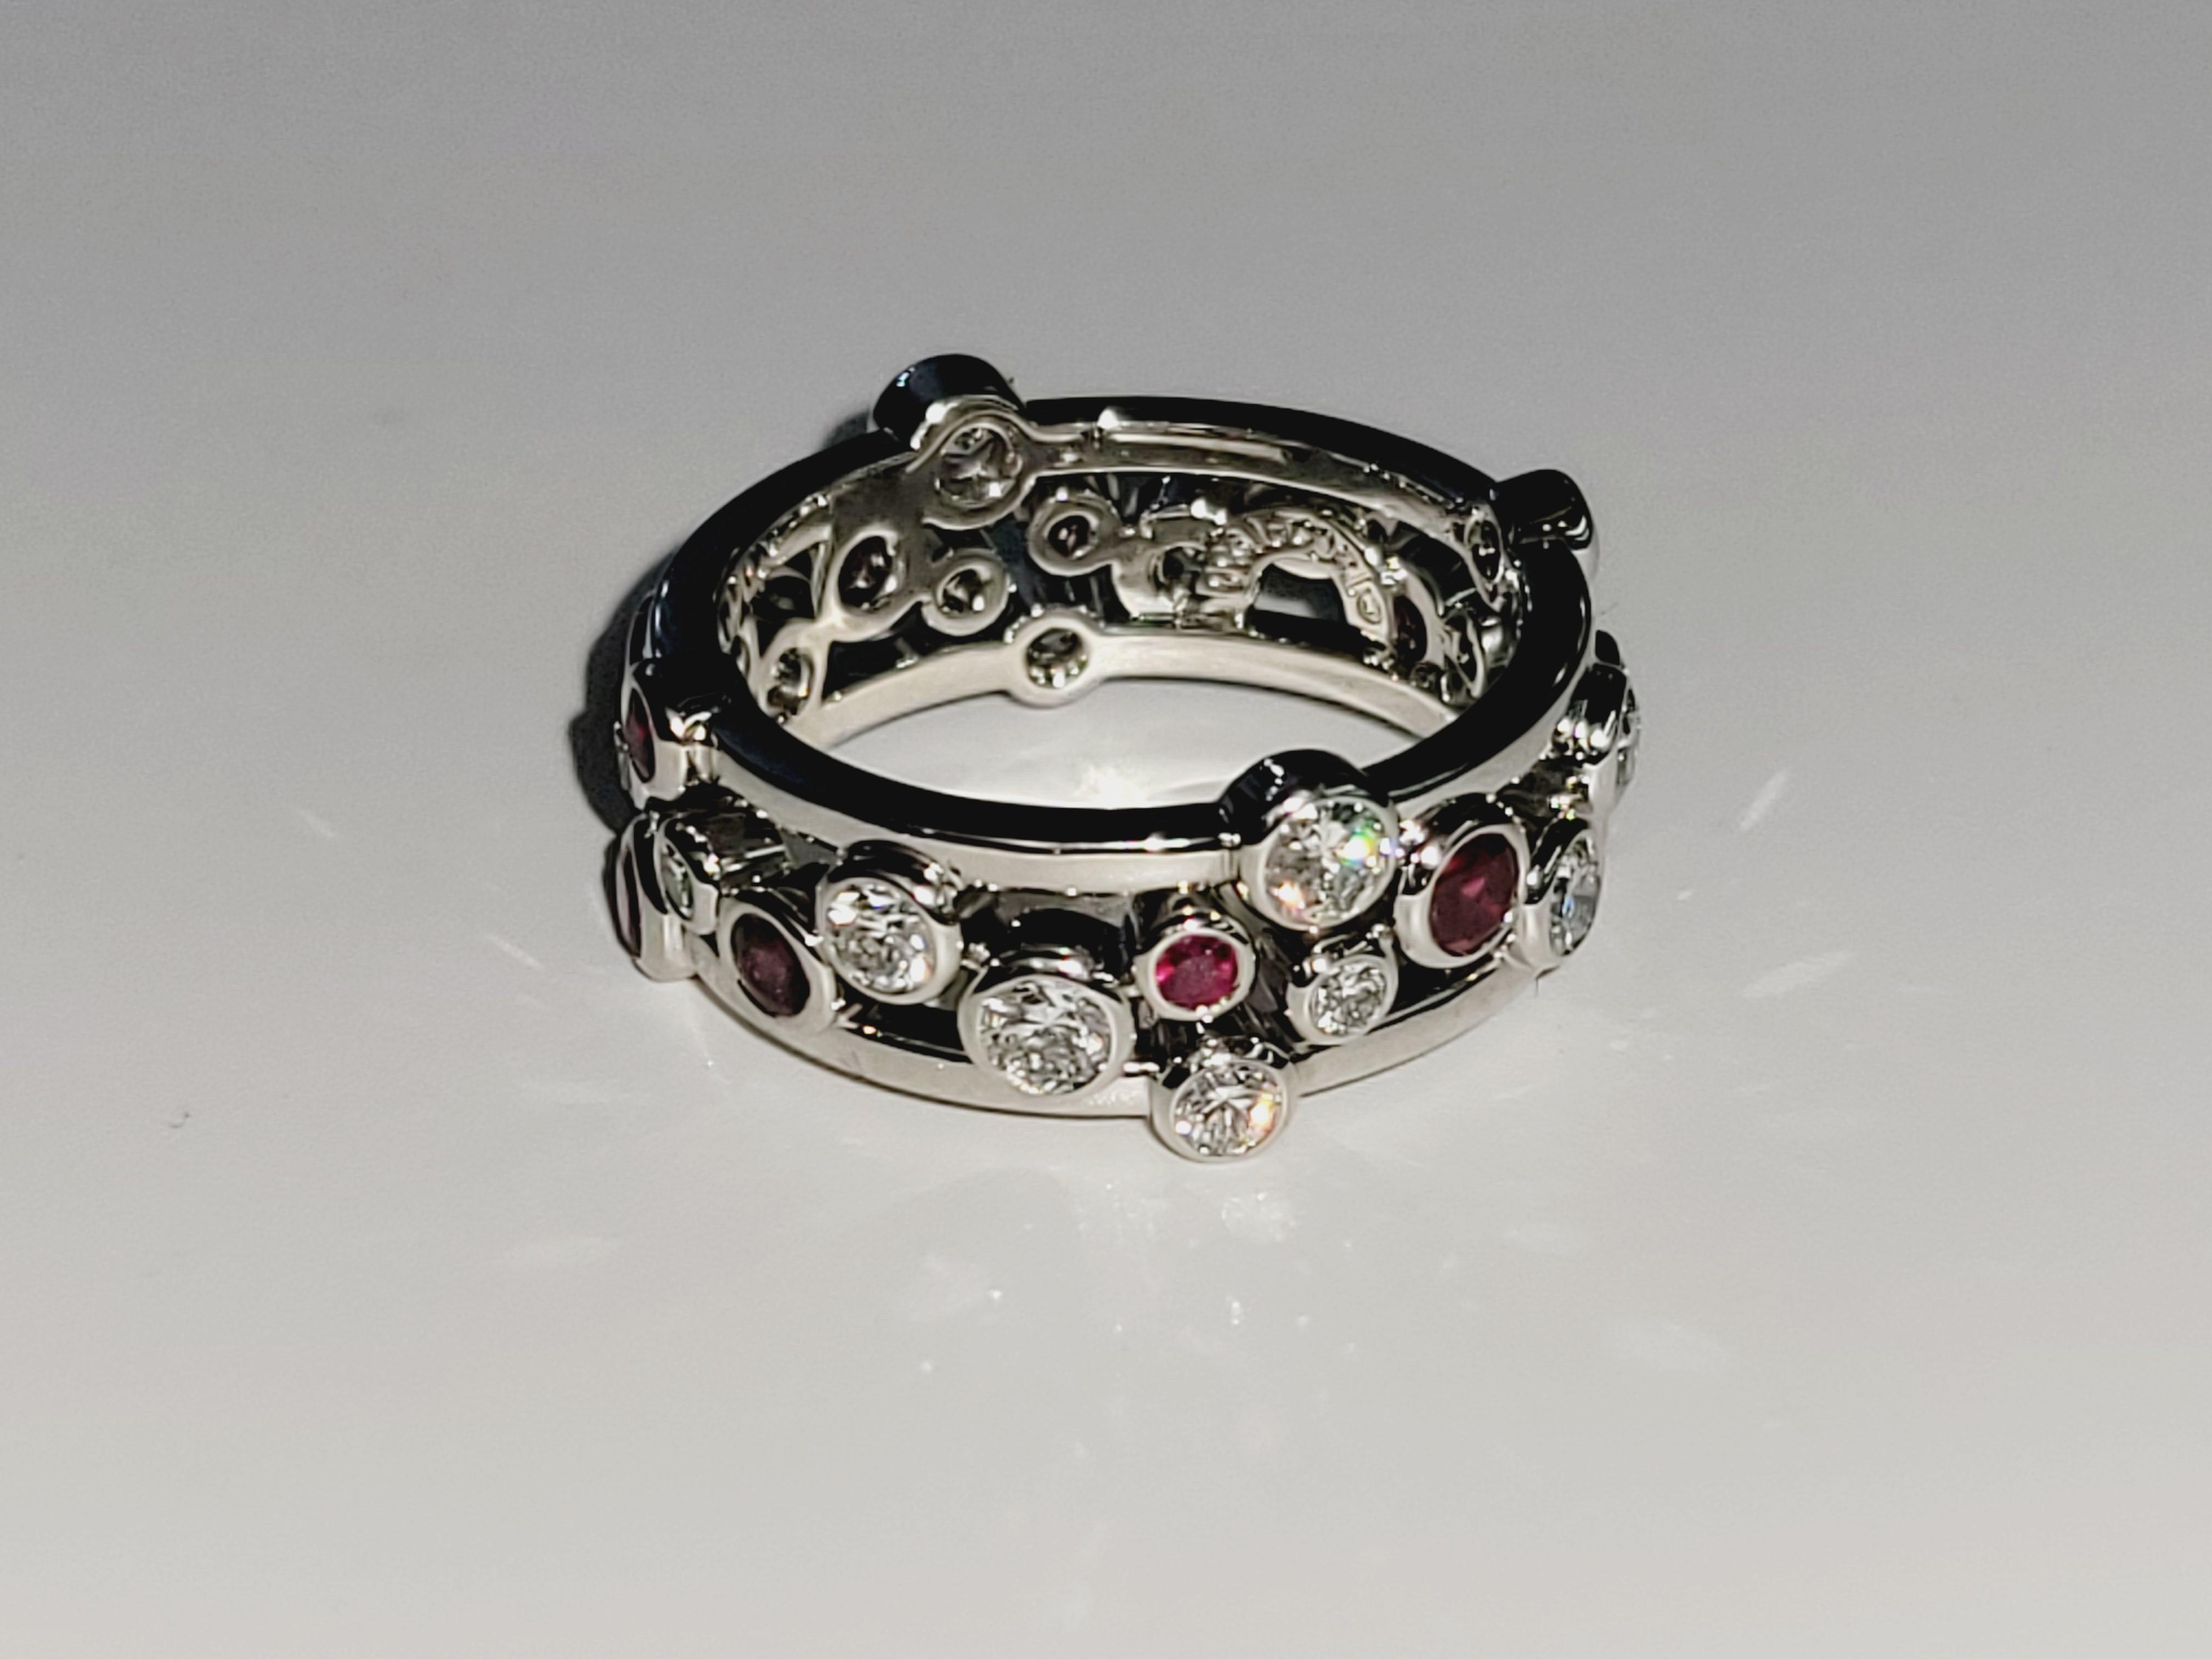 Brand Tiffany & co
Type ring
Condition pre-owned
Ring size 6 3/4
Stones, diamond, ruby
Diamond color, clarity  F-G, vs
Carat weight 1.6ct
Metal 950 platinum